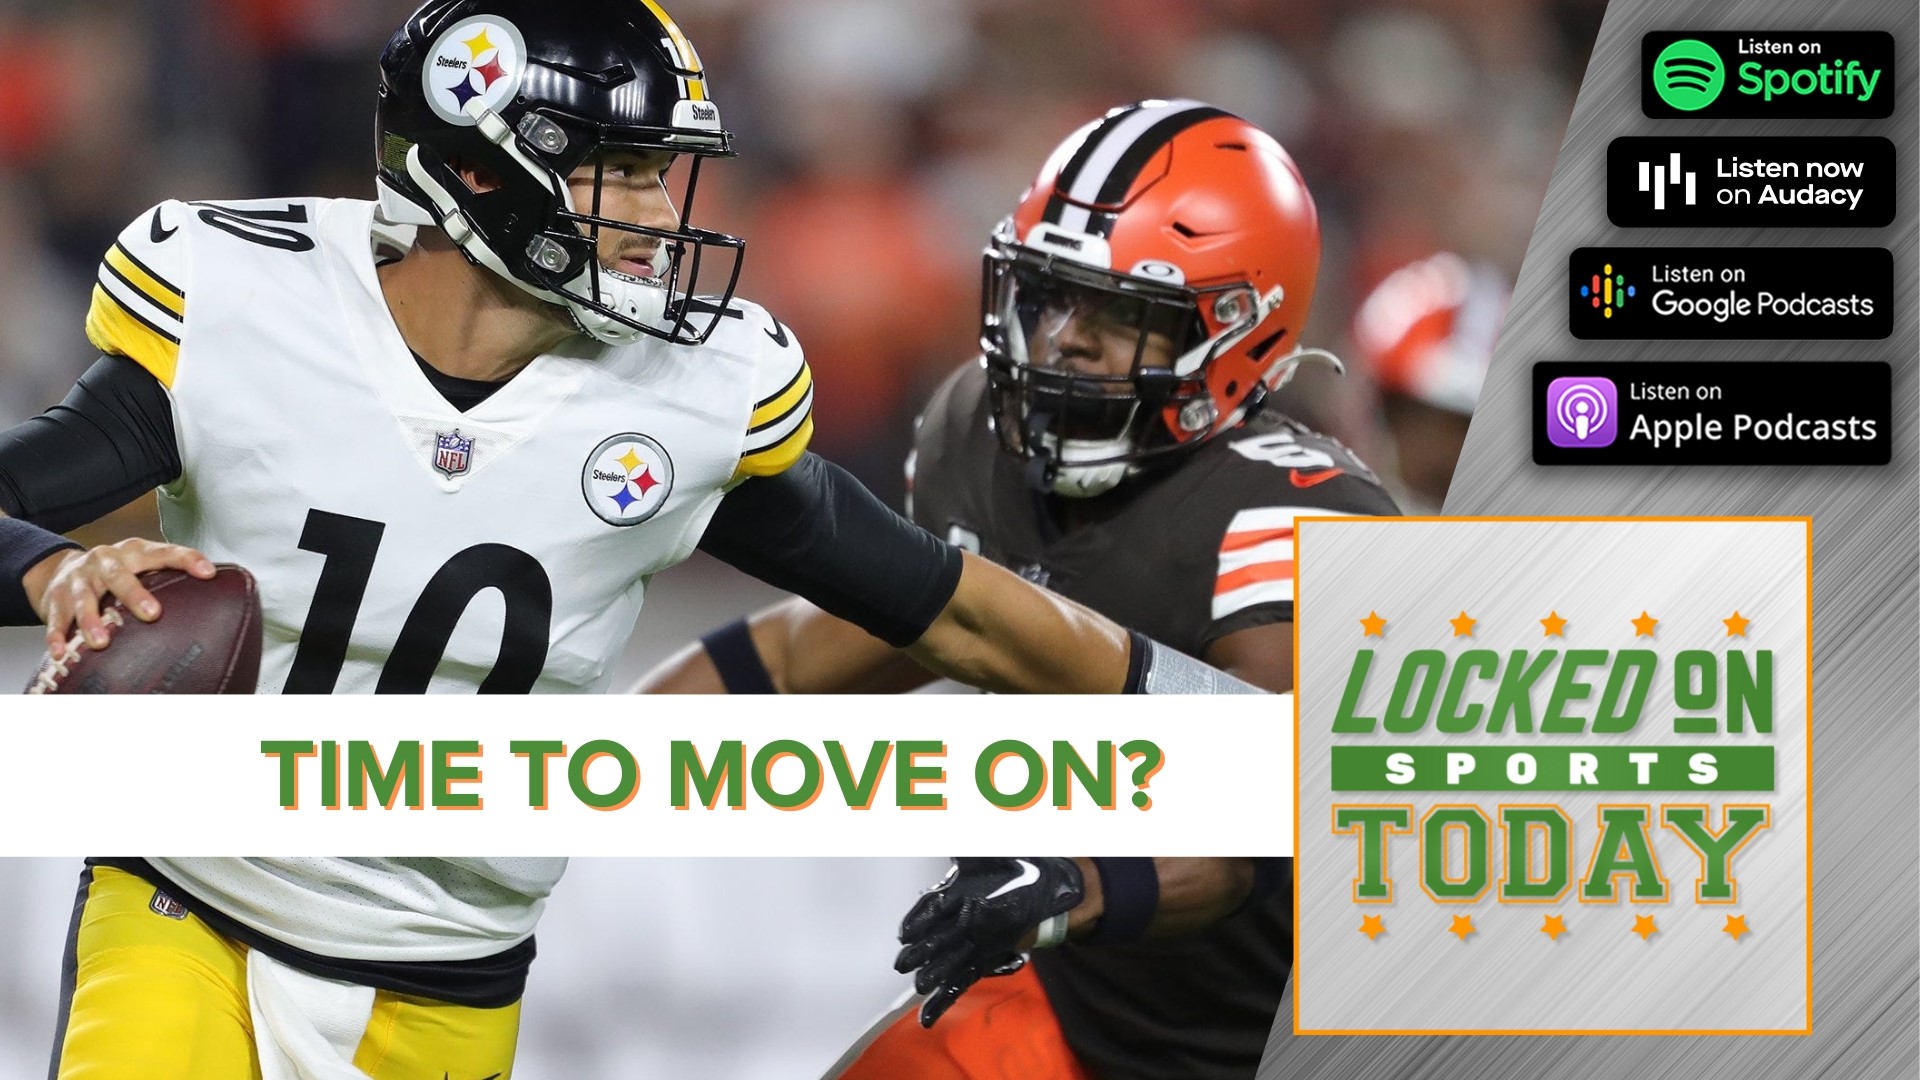 Discussing the day's top sports stories from the Steelers loss and the future of Mitch Trubisky's career as starting QB to the chance of upsetting the Bills.